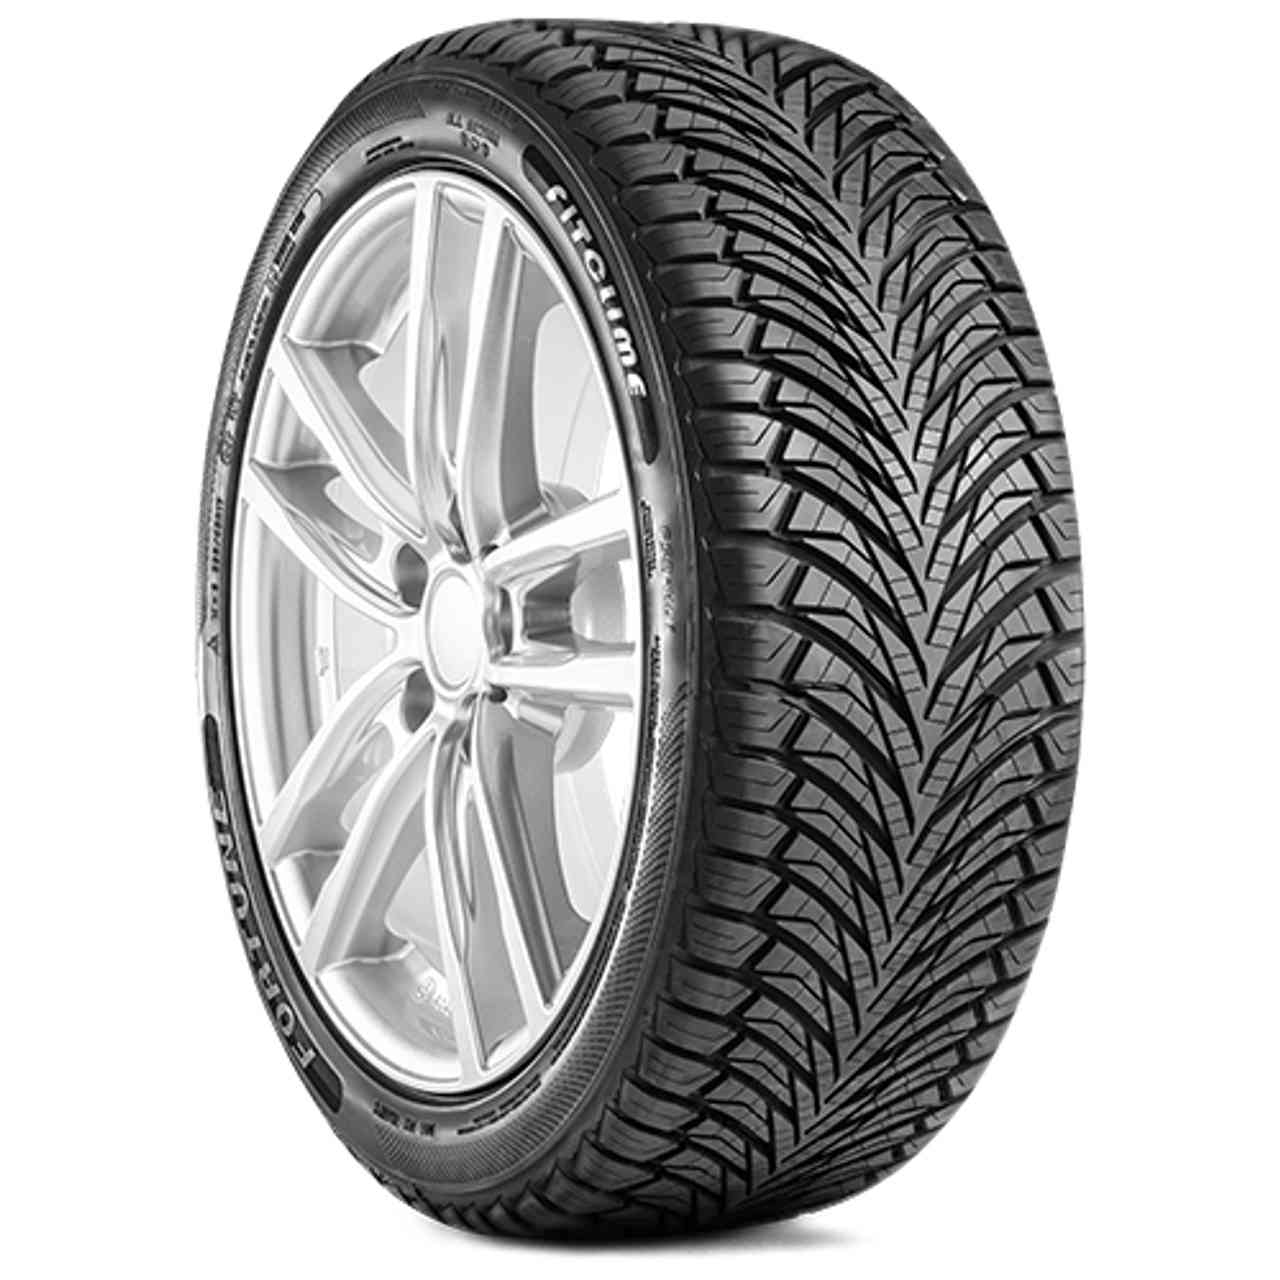 FORTUNE FITCLIME FSR-401 215/65R16 98H BSW